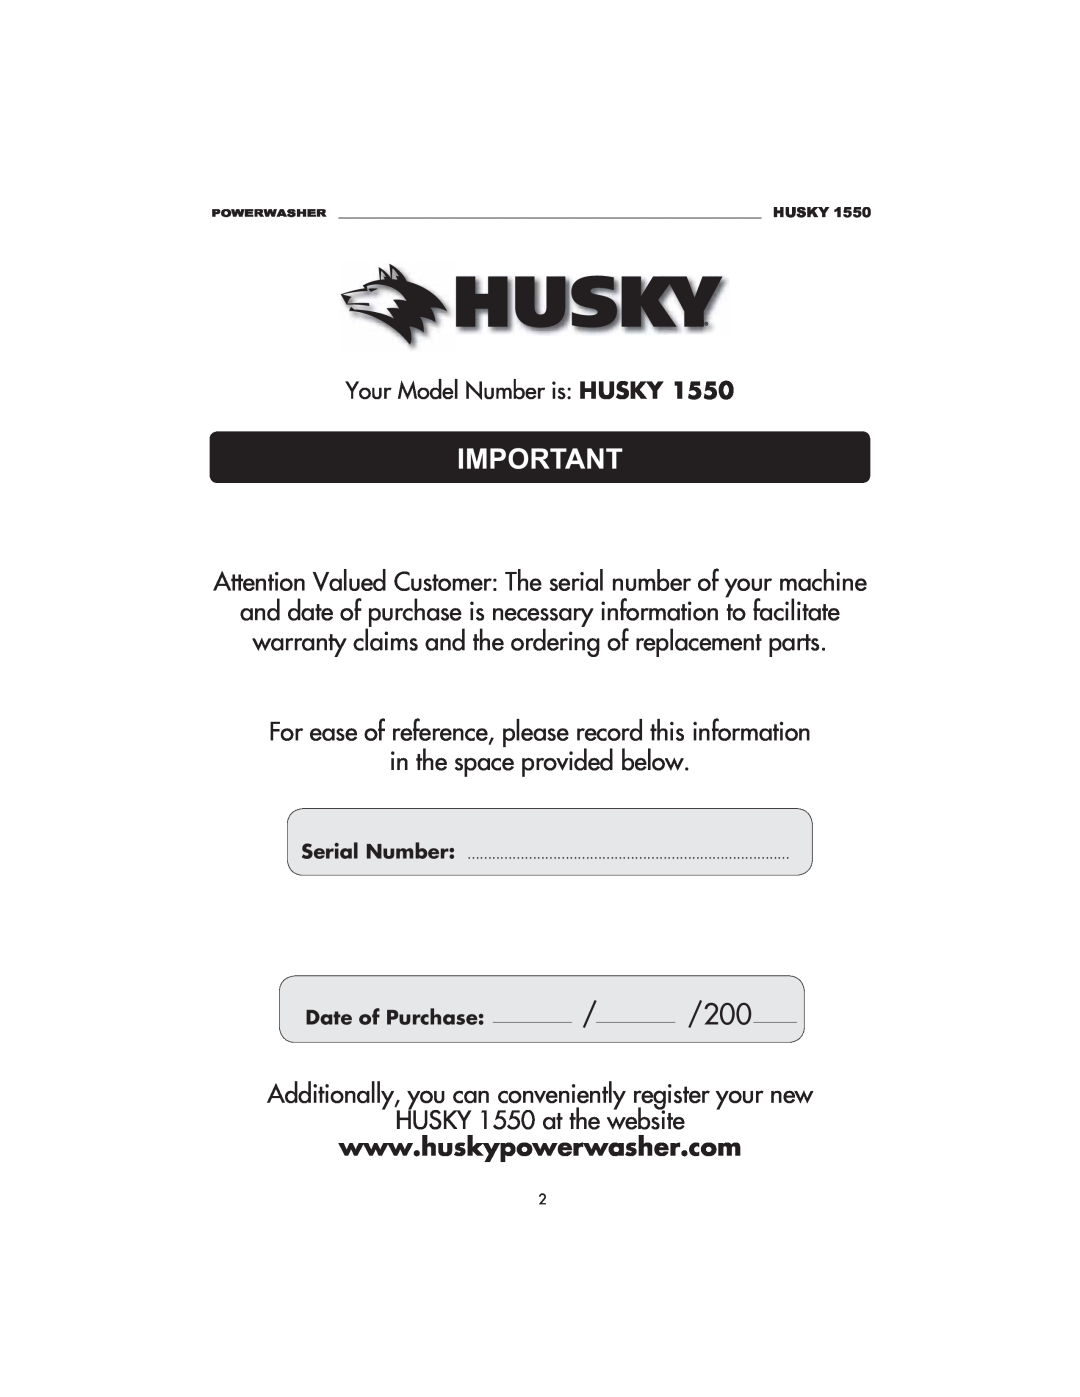 Husky 1550 PSL warranty in the space provided below, HUSKY 1550 at the website 